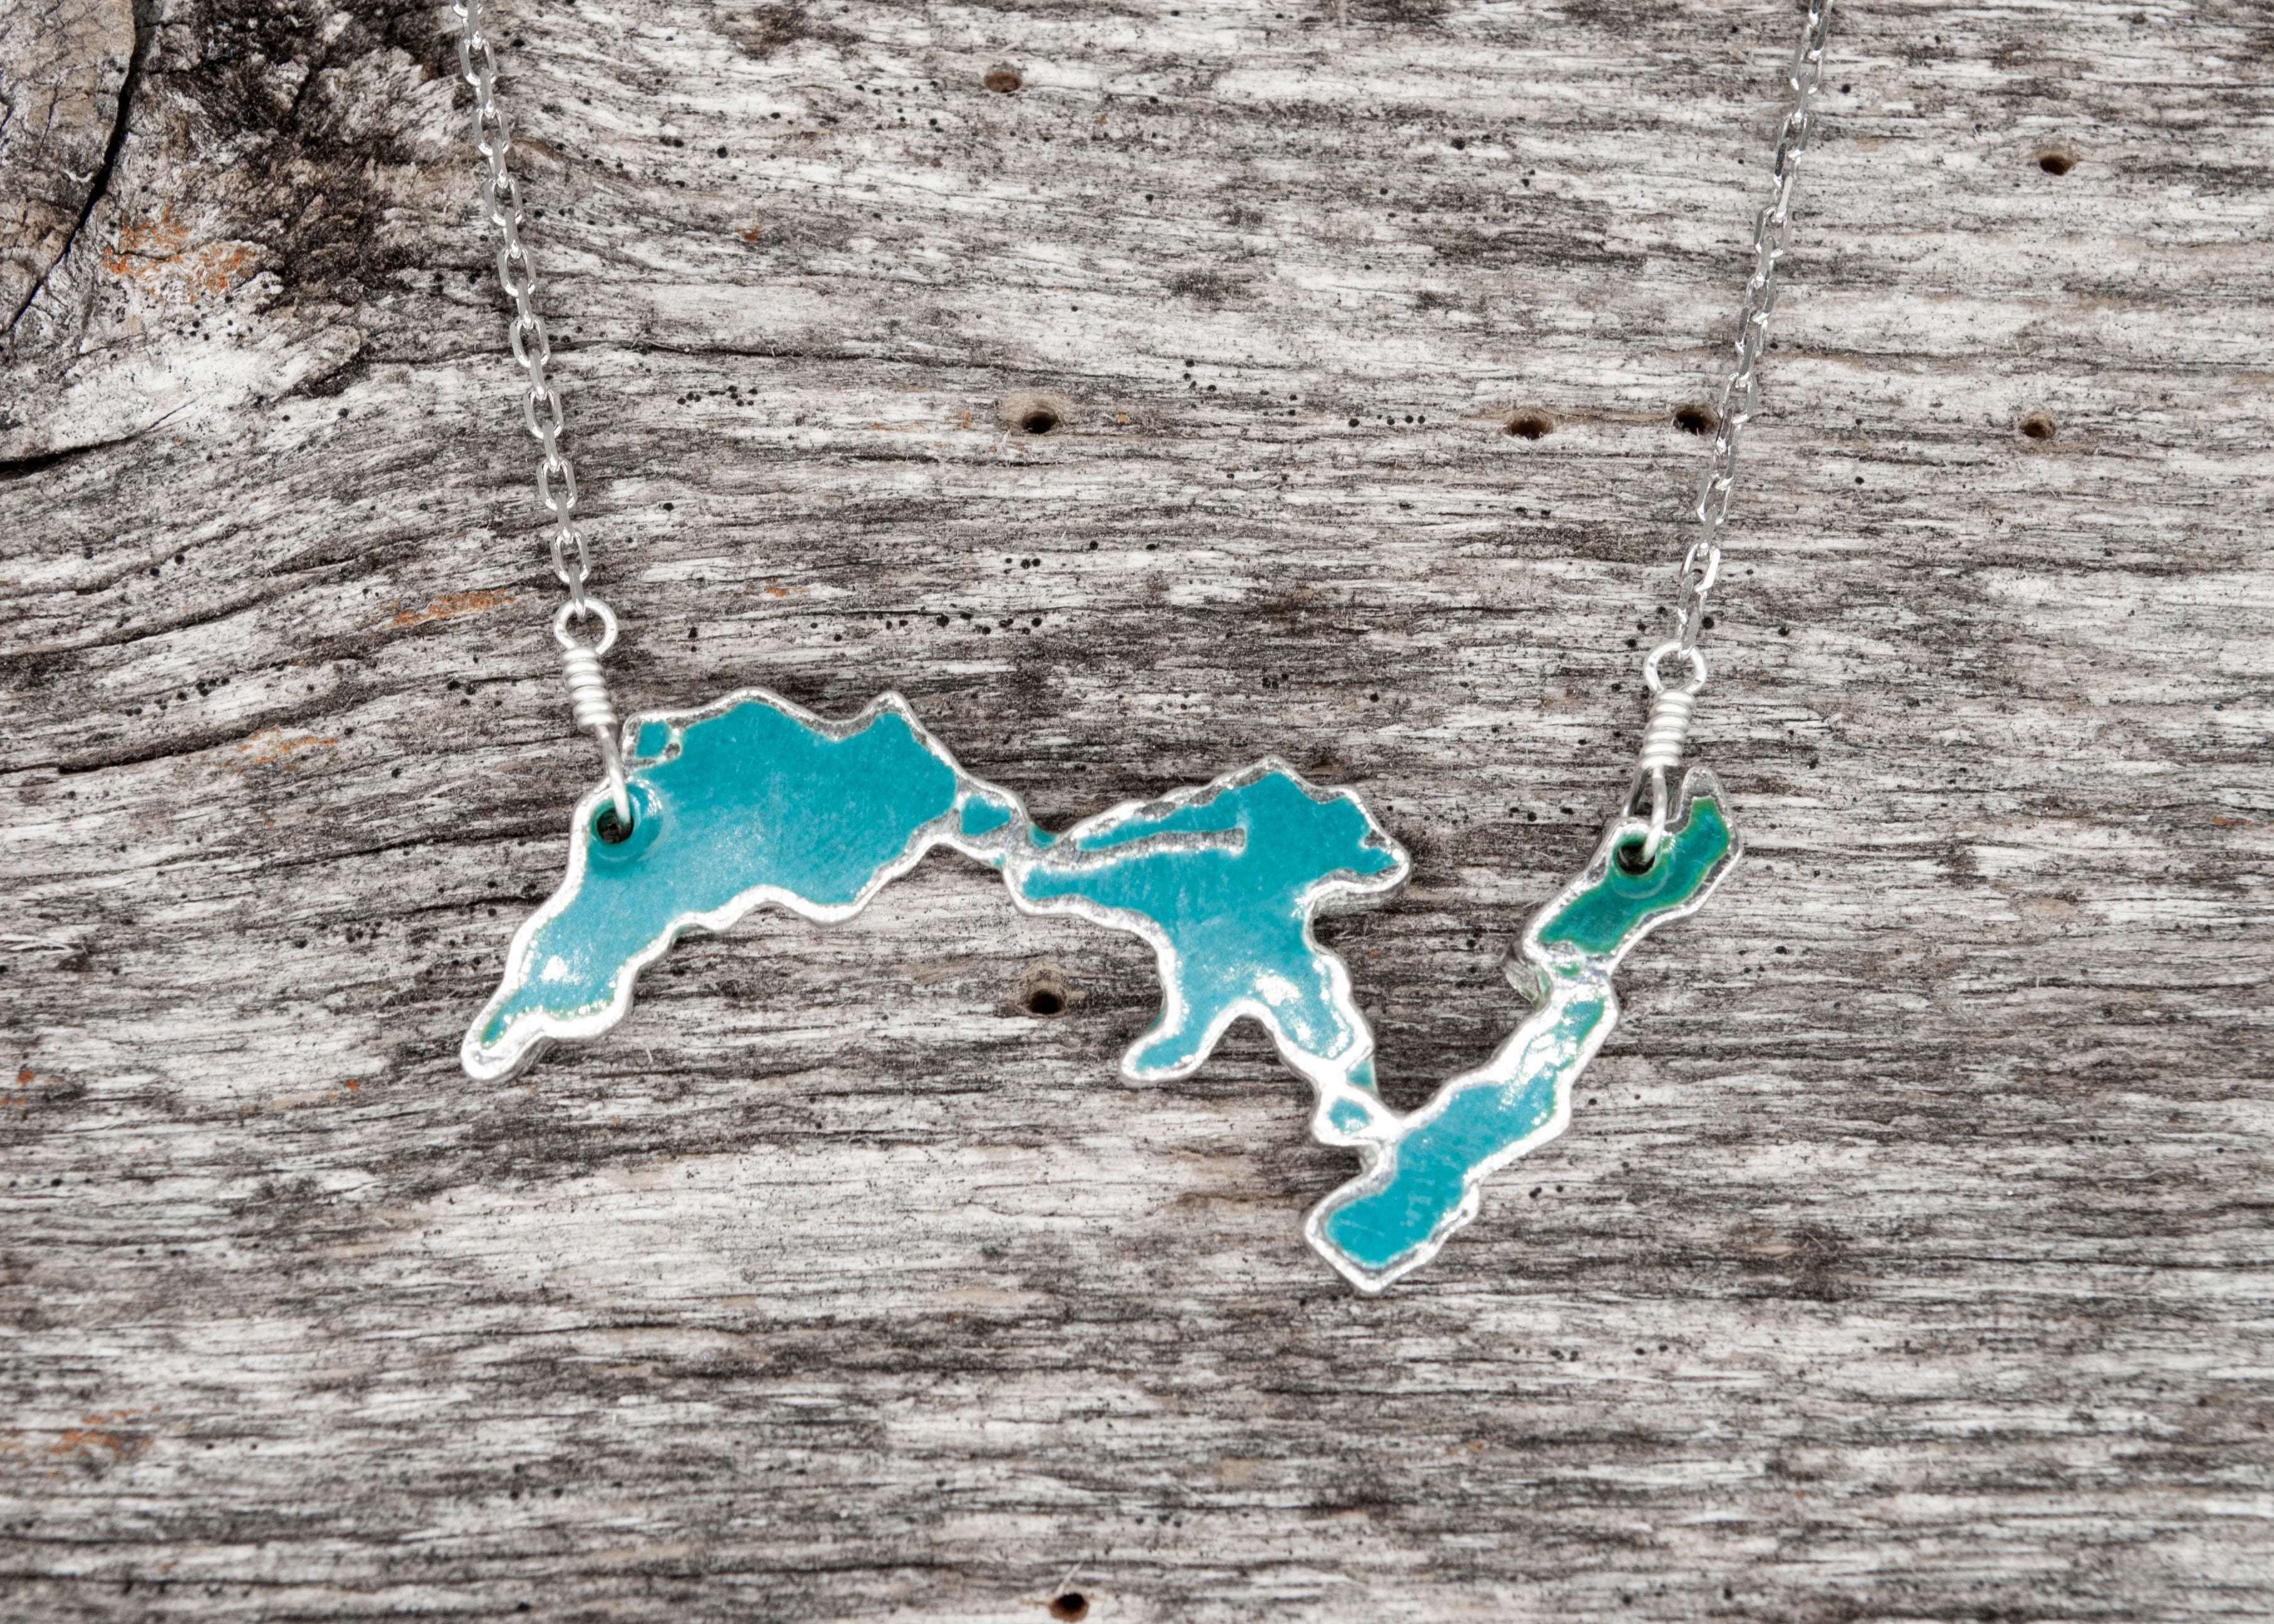 Canadian Great Lakes Necklace